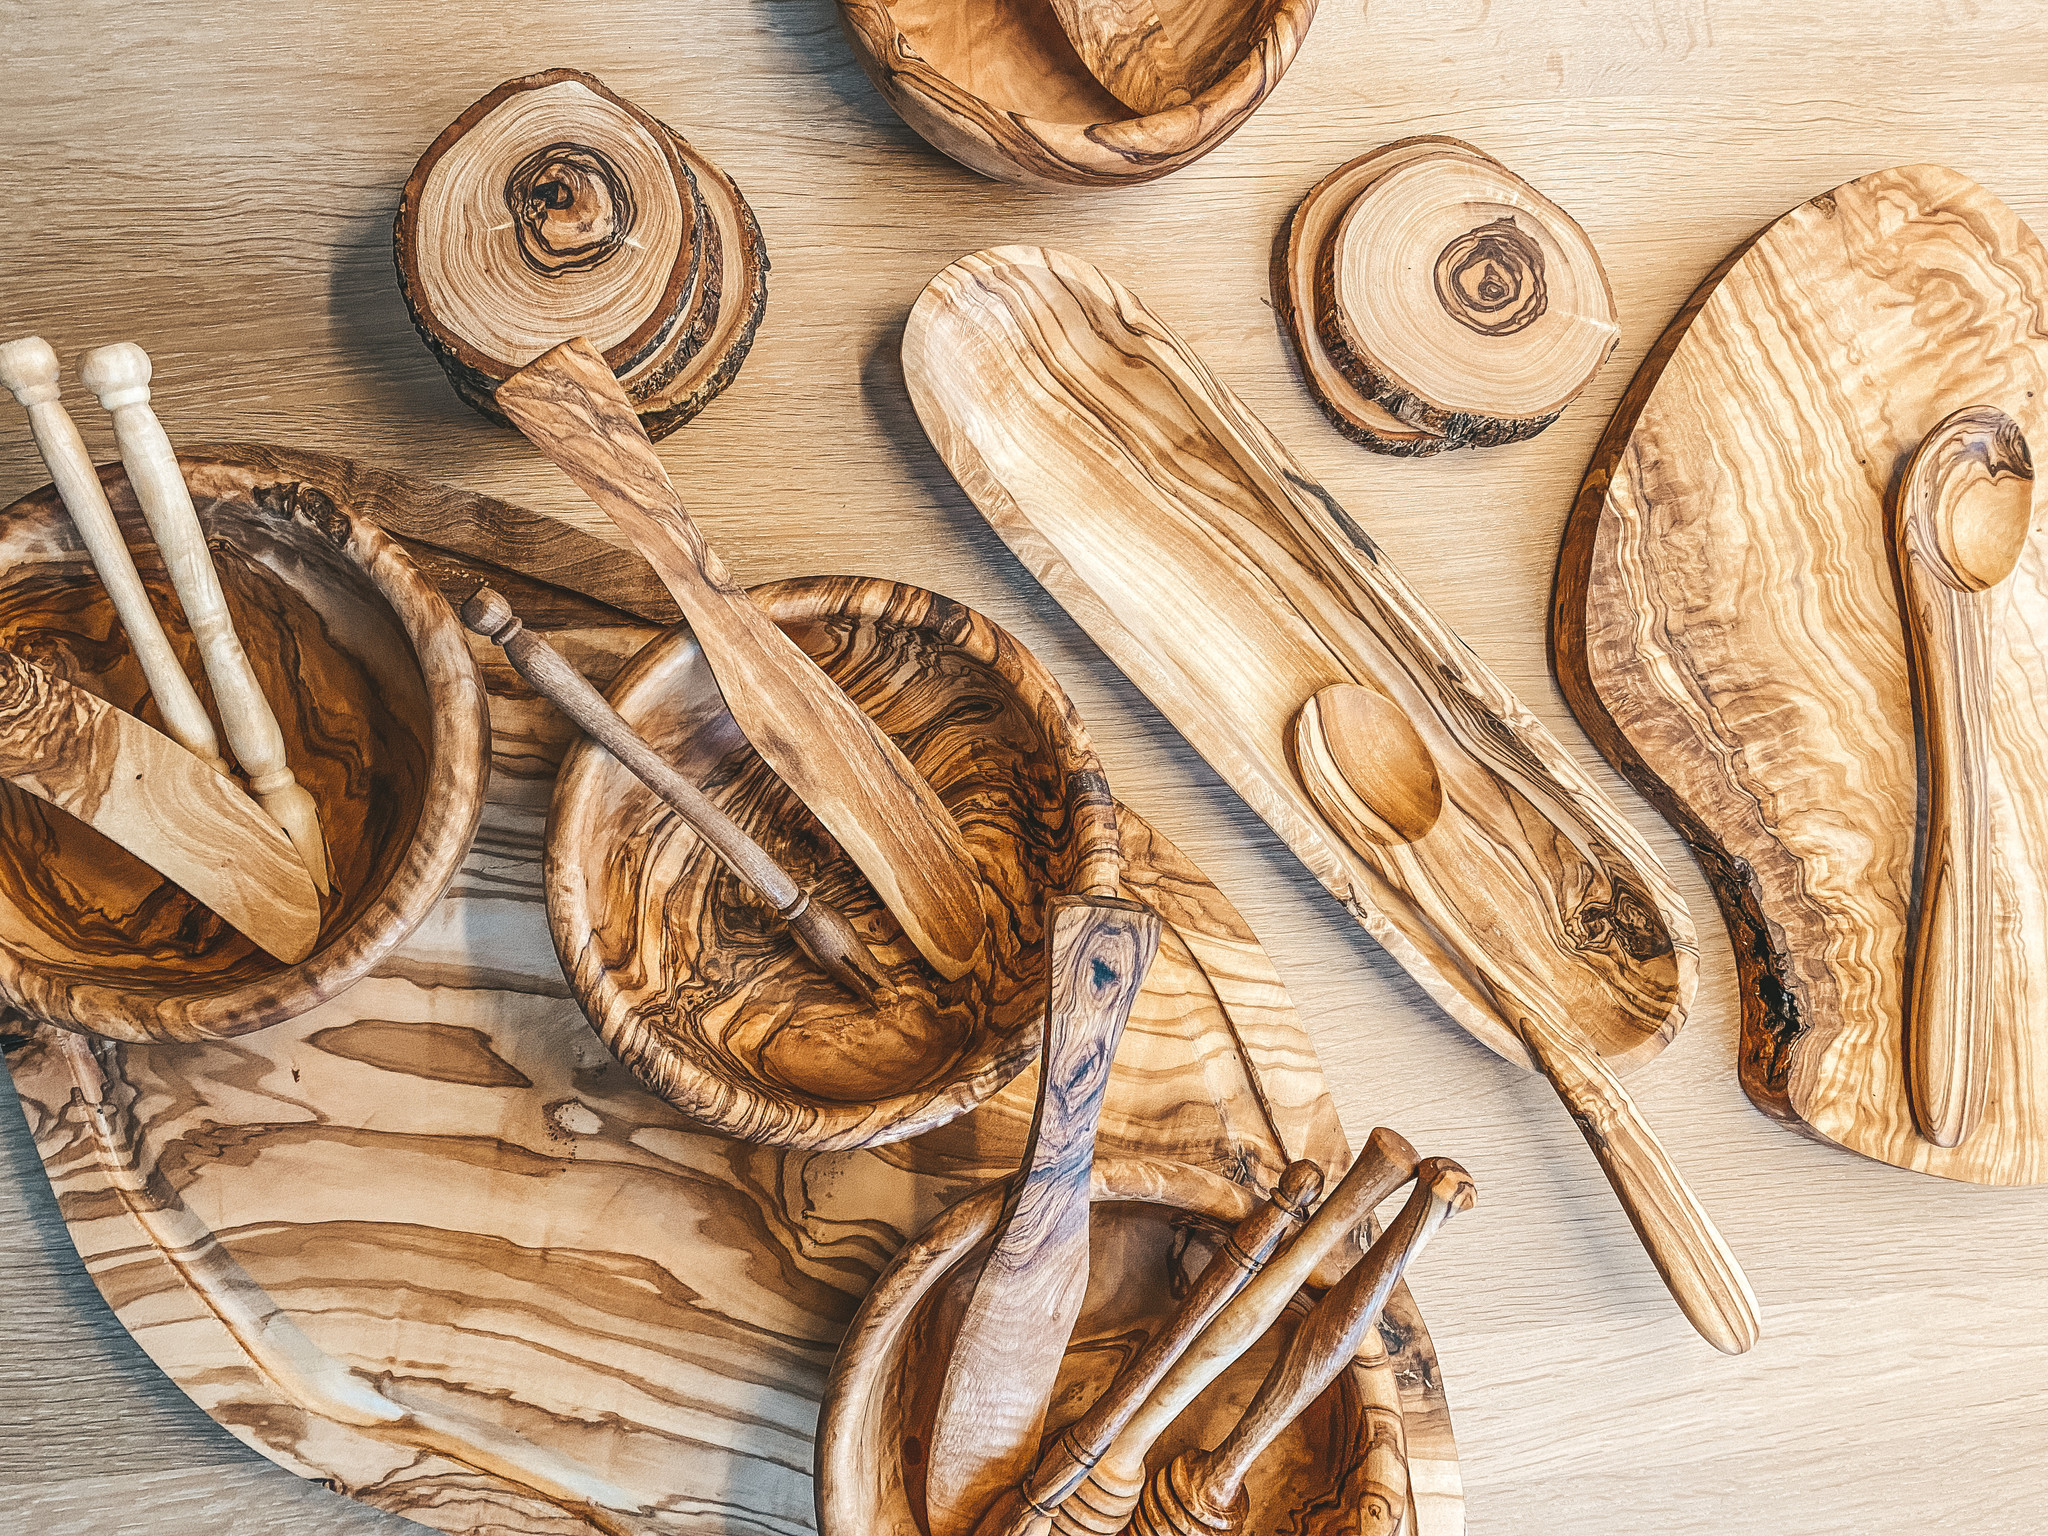 Natural tips: How to maintain your wooden utensils?